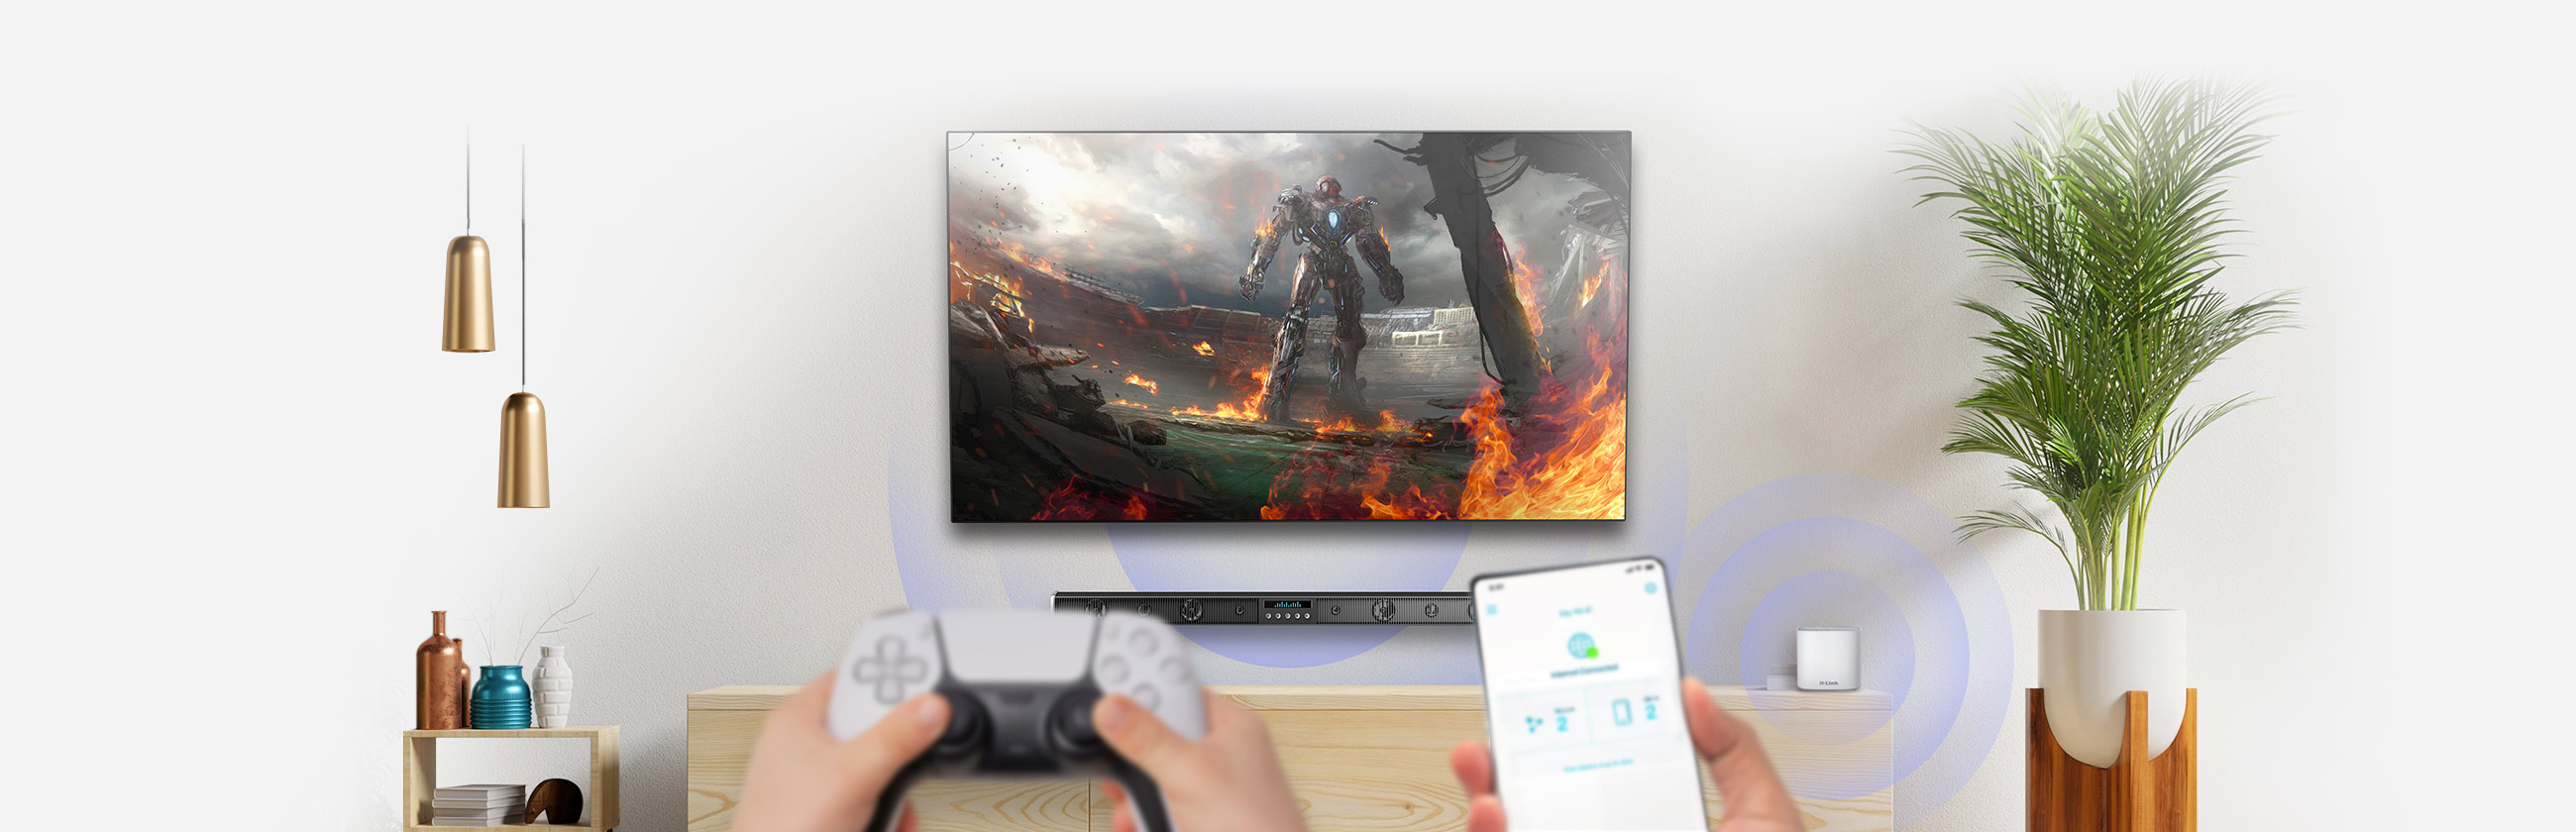 Wi-Fi app being used on a phone while a game is played on a living room TV.